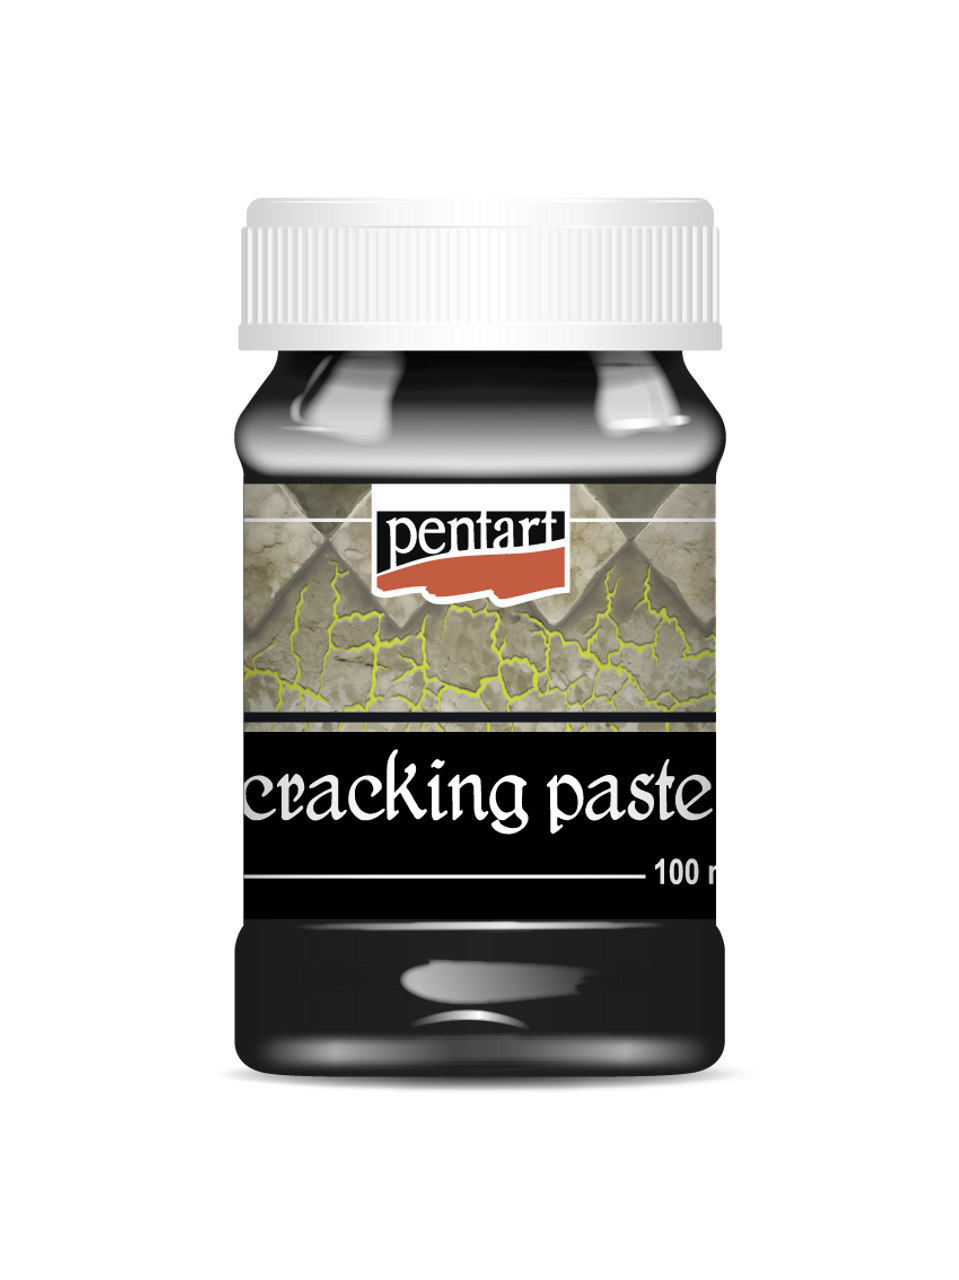 Pentart Cracking Paste 100ml  this is component 2 of a 2 part crackle system